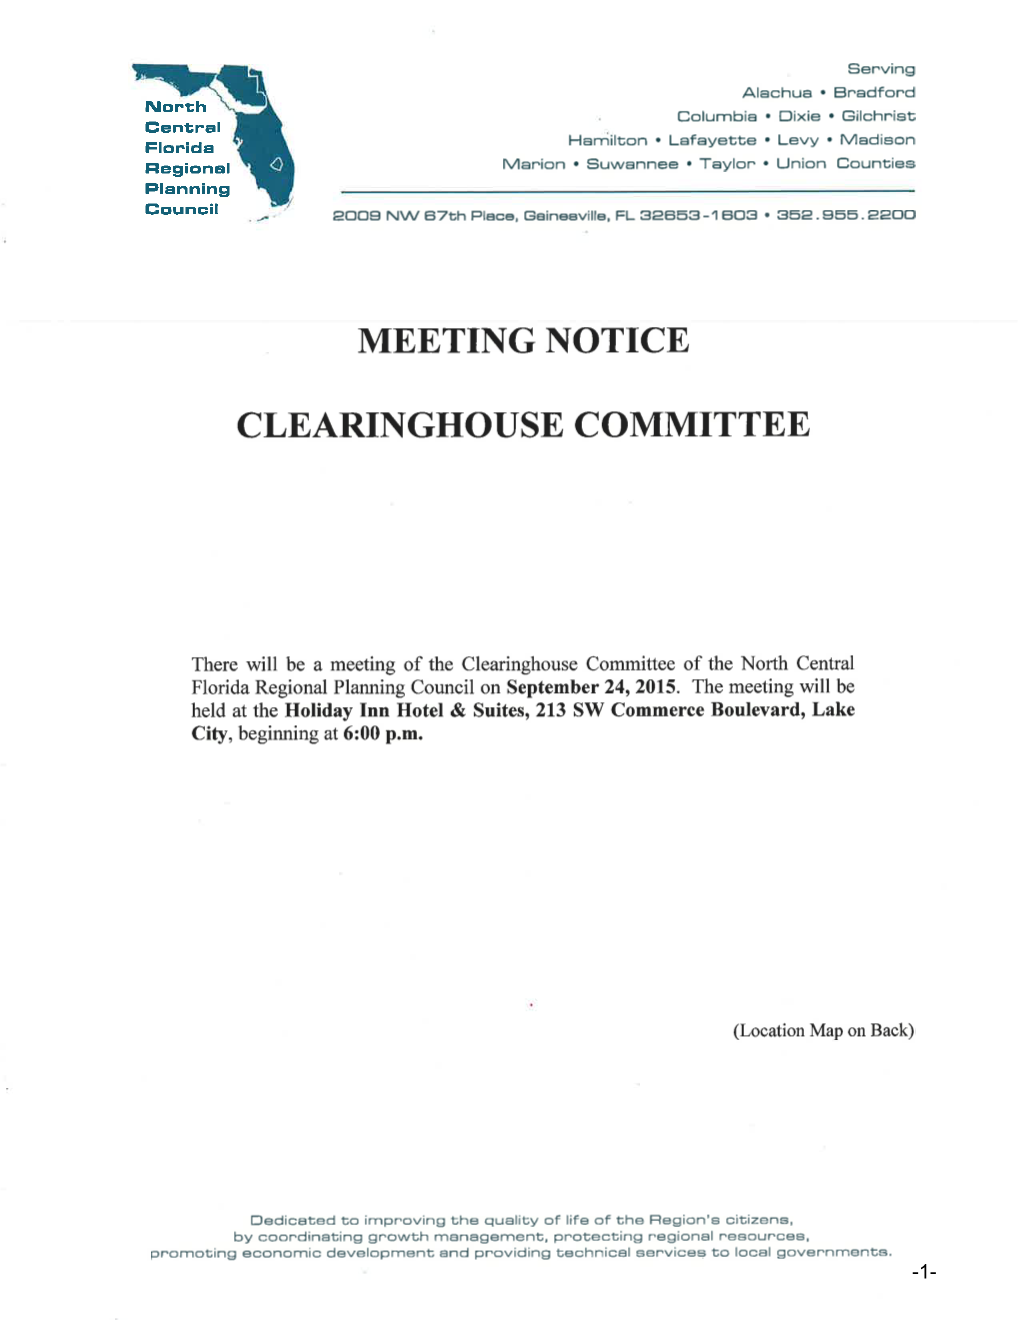 Meeting Notice Clearinghouse Committee